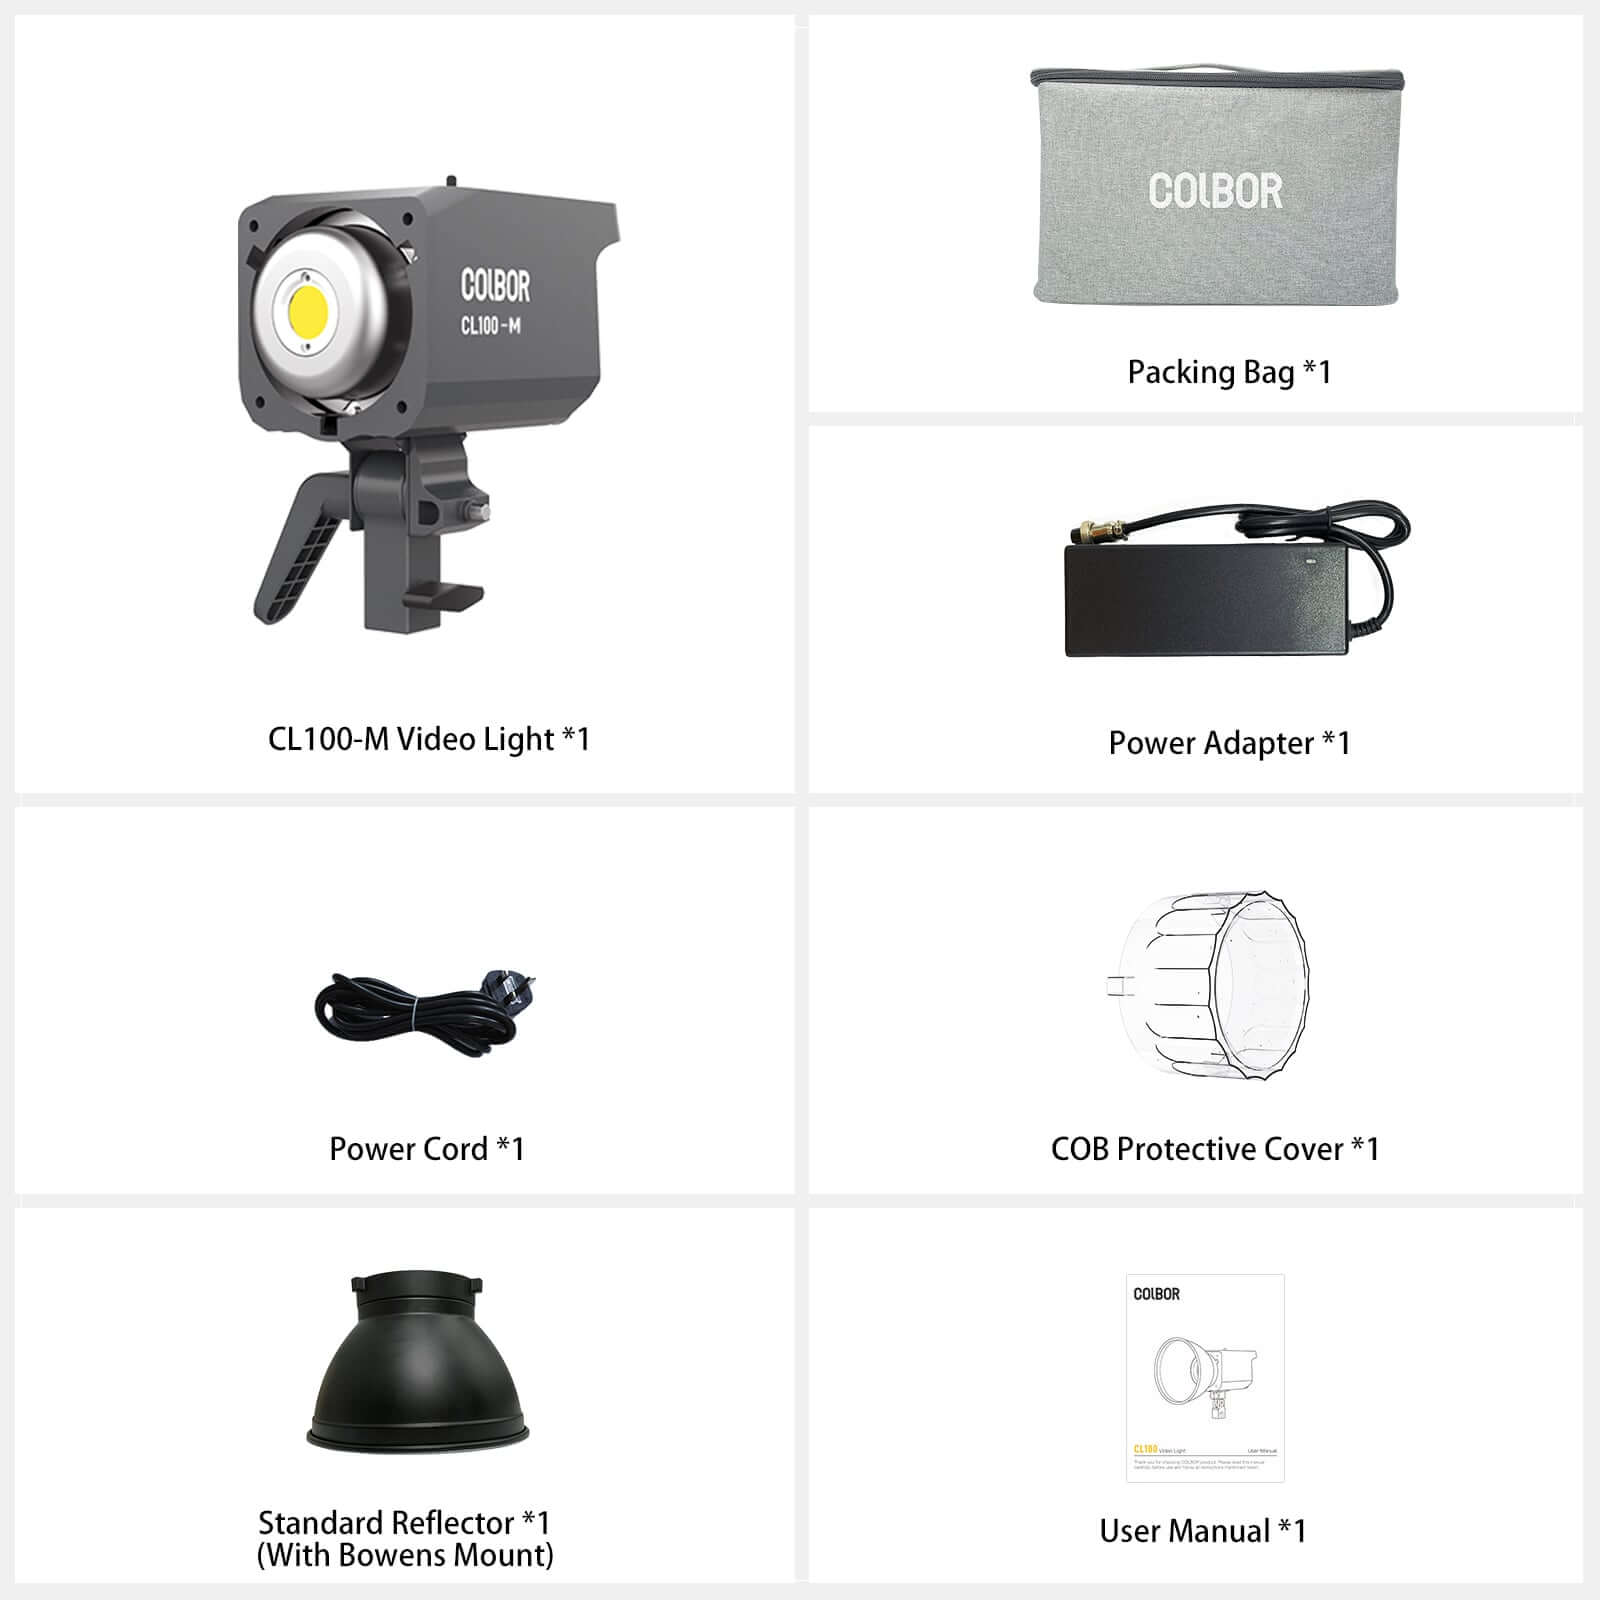 COLBOR CL100M's package includes the video light, a packing bag, a power adapter, a power cord, a COB protective cover, a standard reflector and a user manual